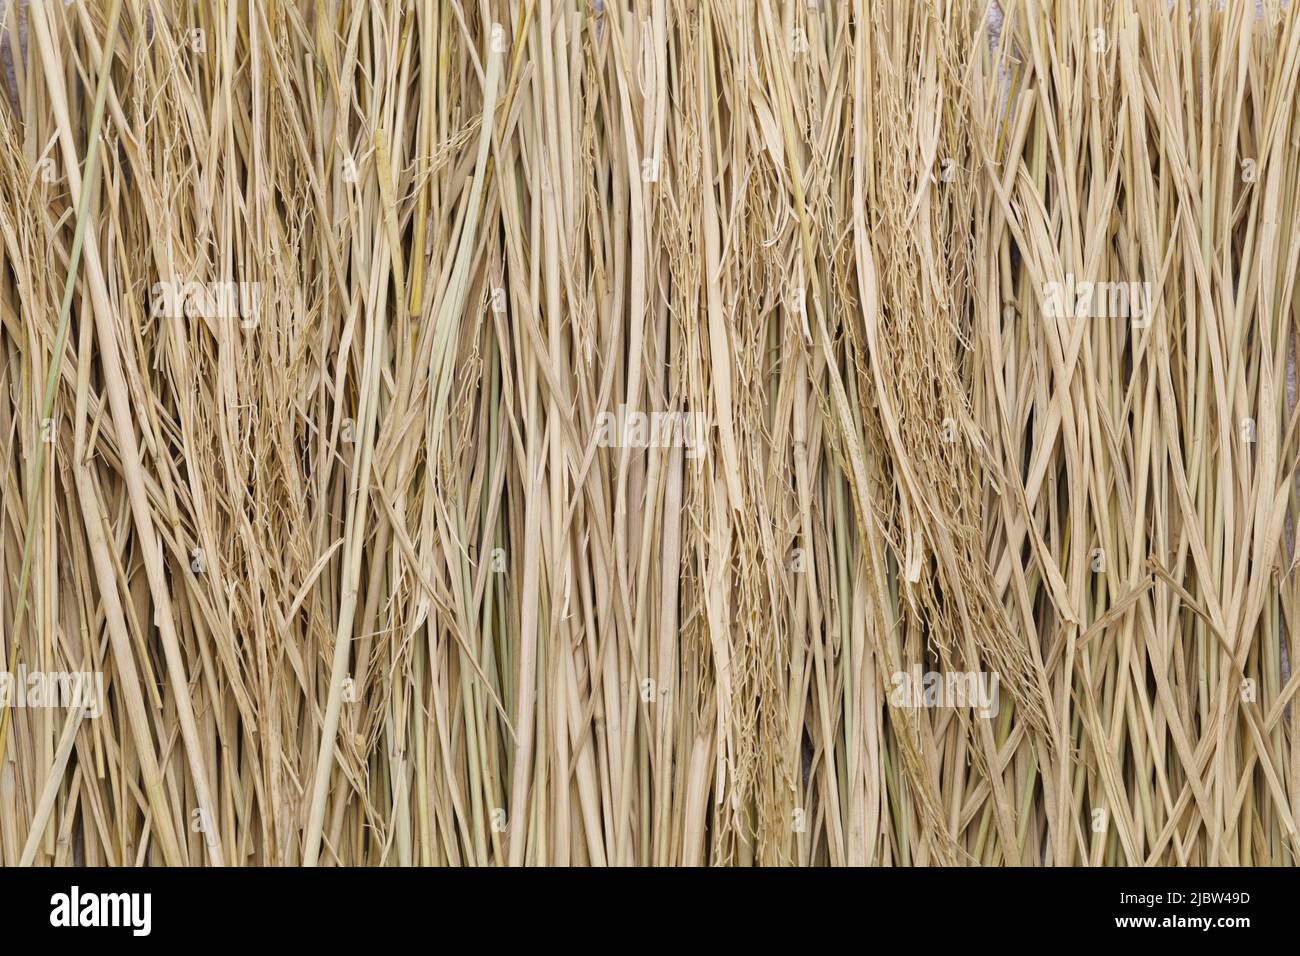 rice straw, fuel for cooking light grill bonito Stock Photo